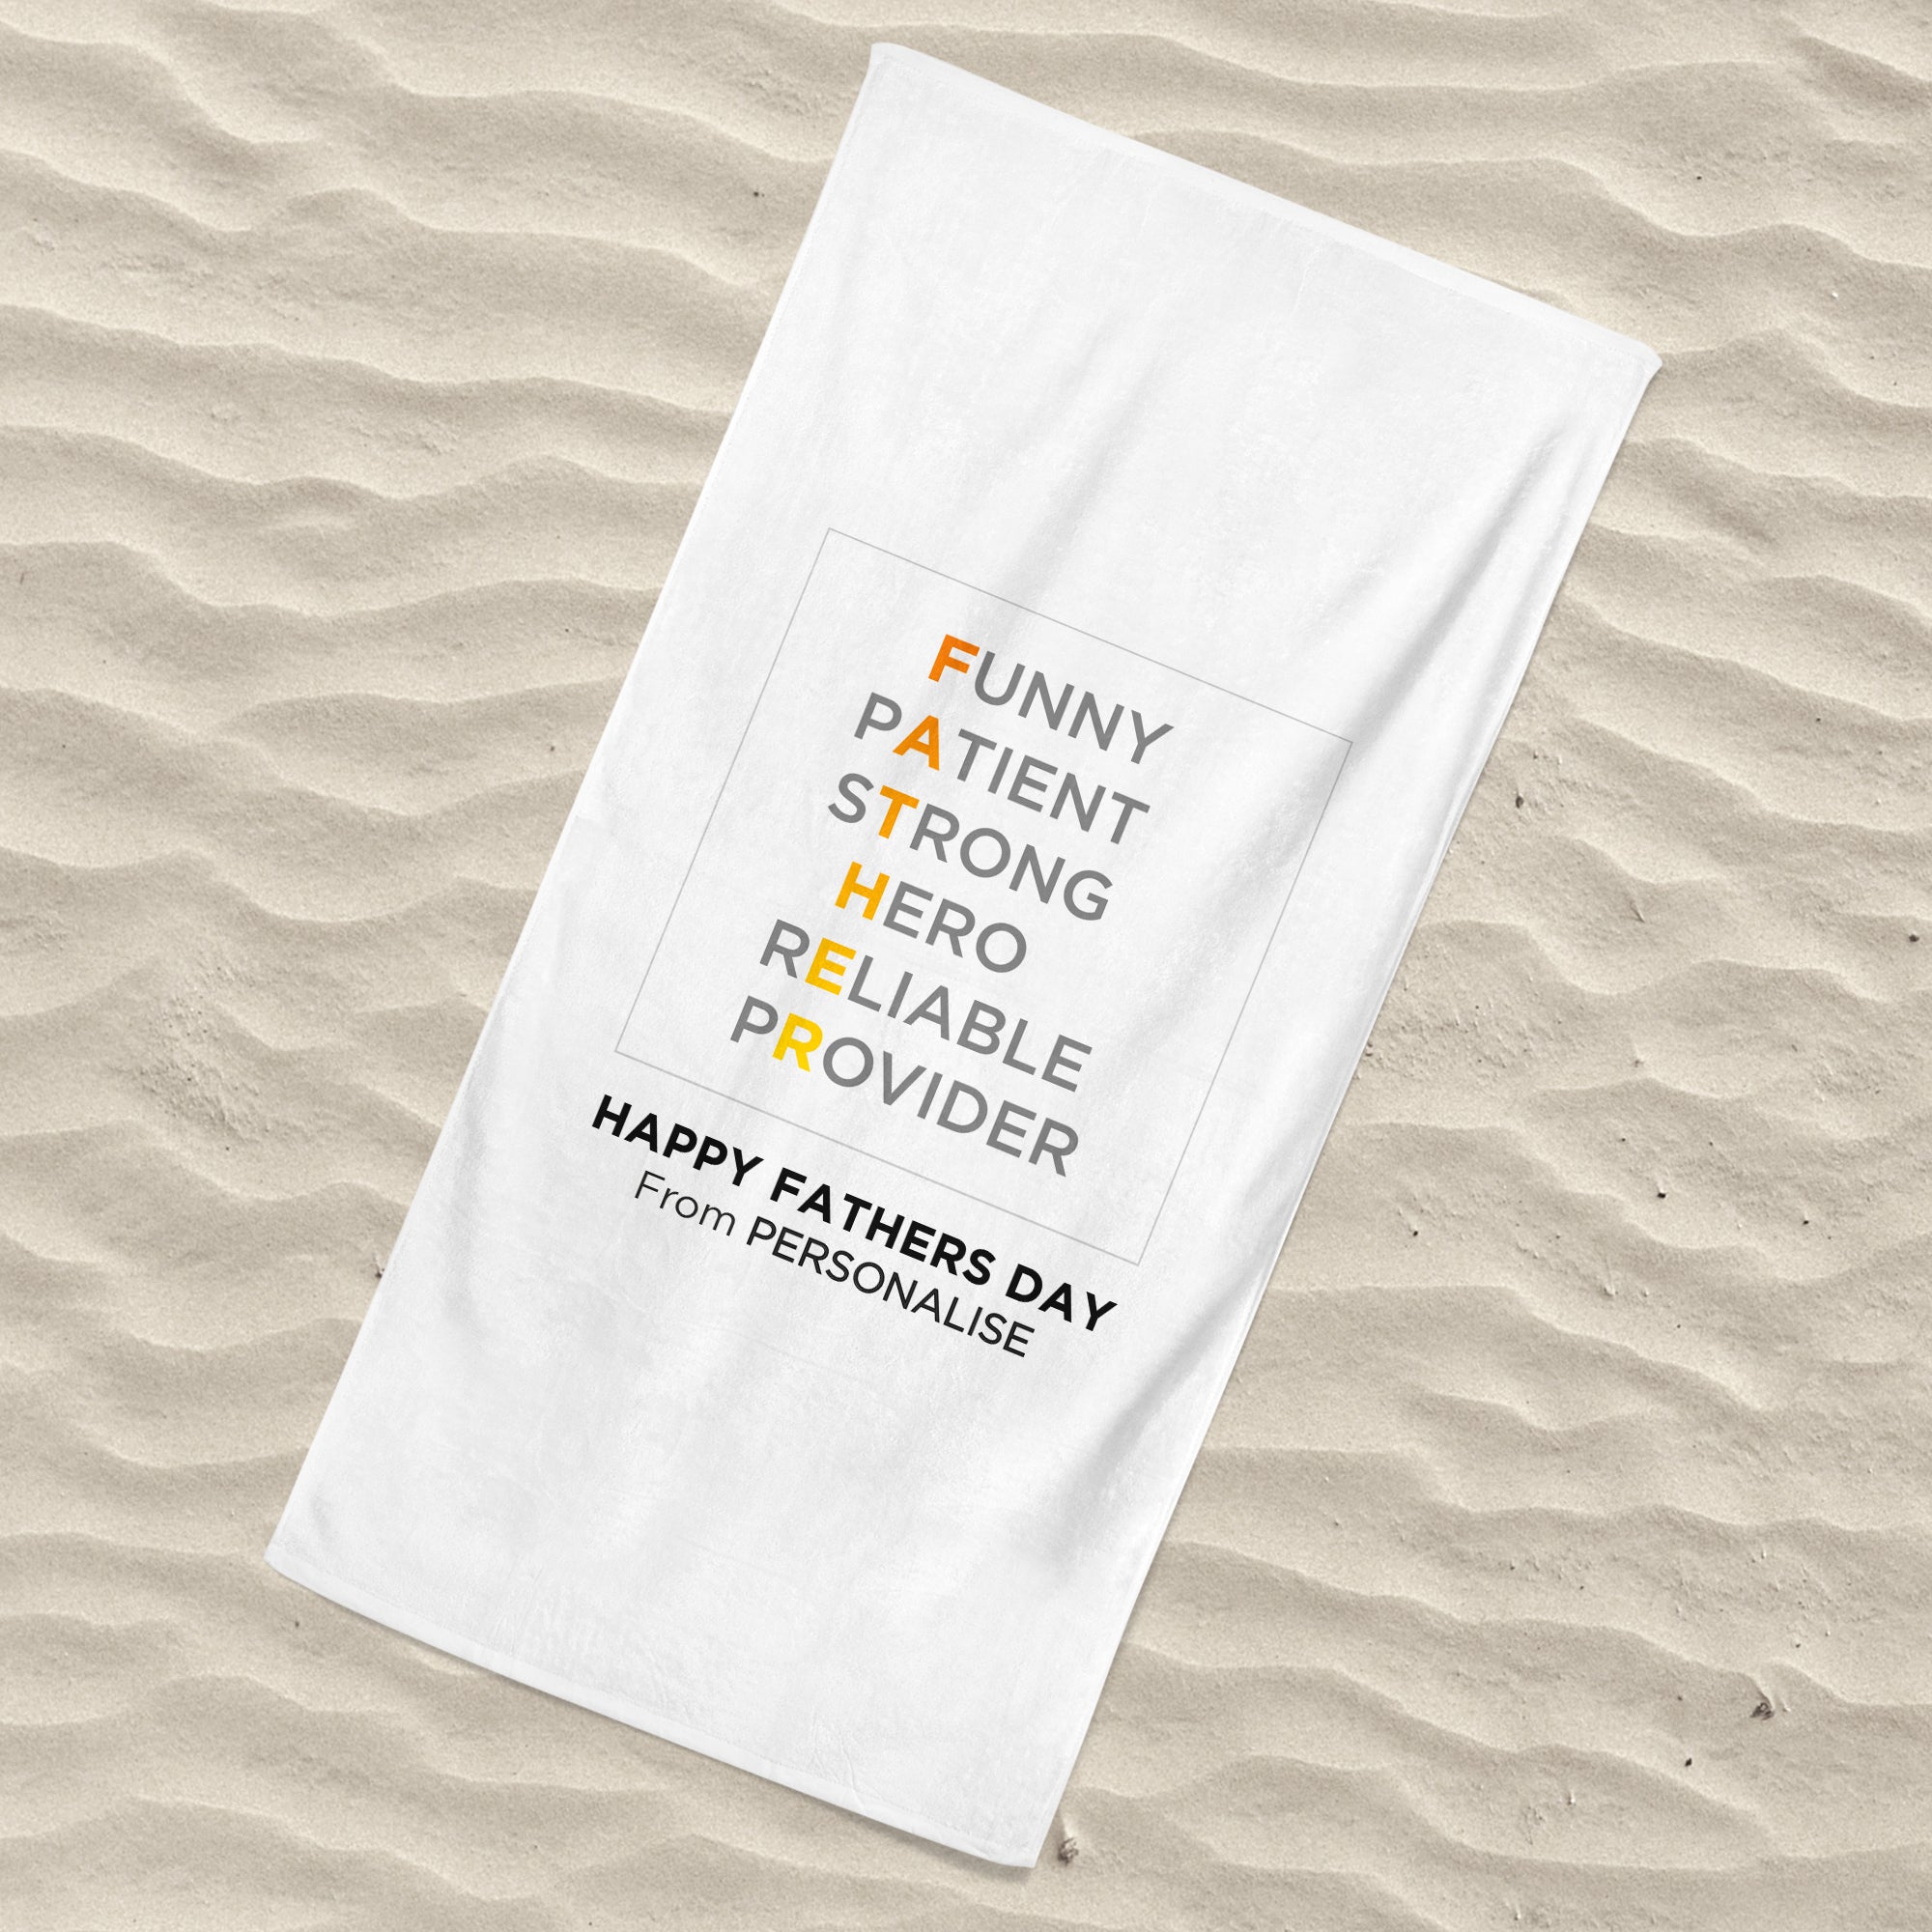 Beach Towel White with Scrabble Design - Happy Fathers Day - Personalise with Name